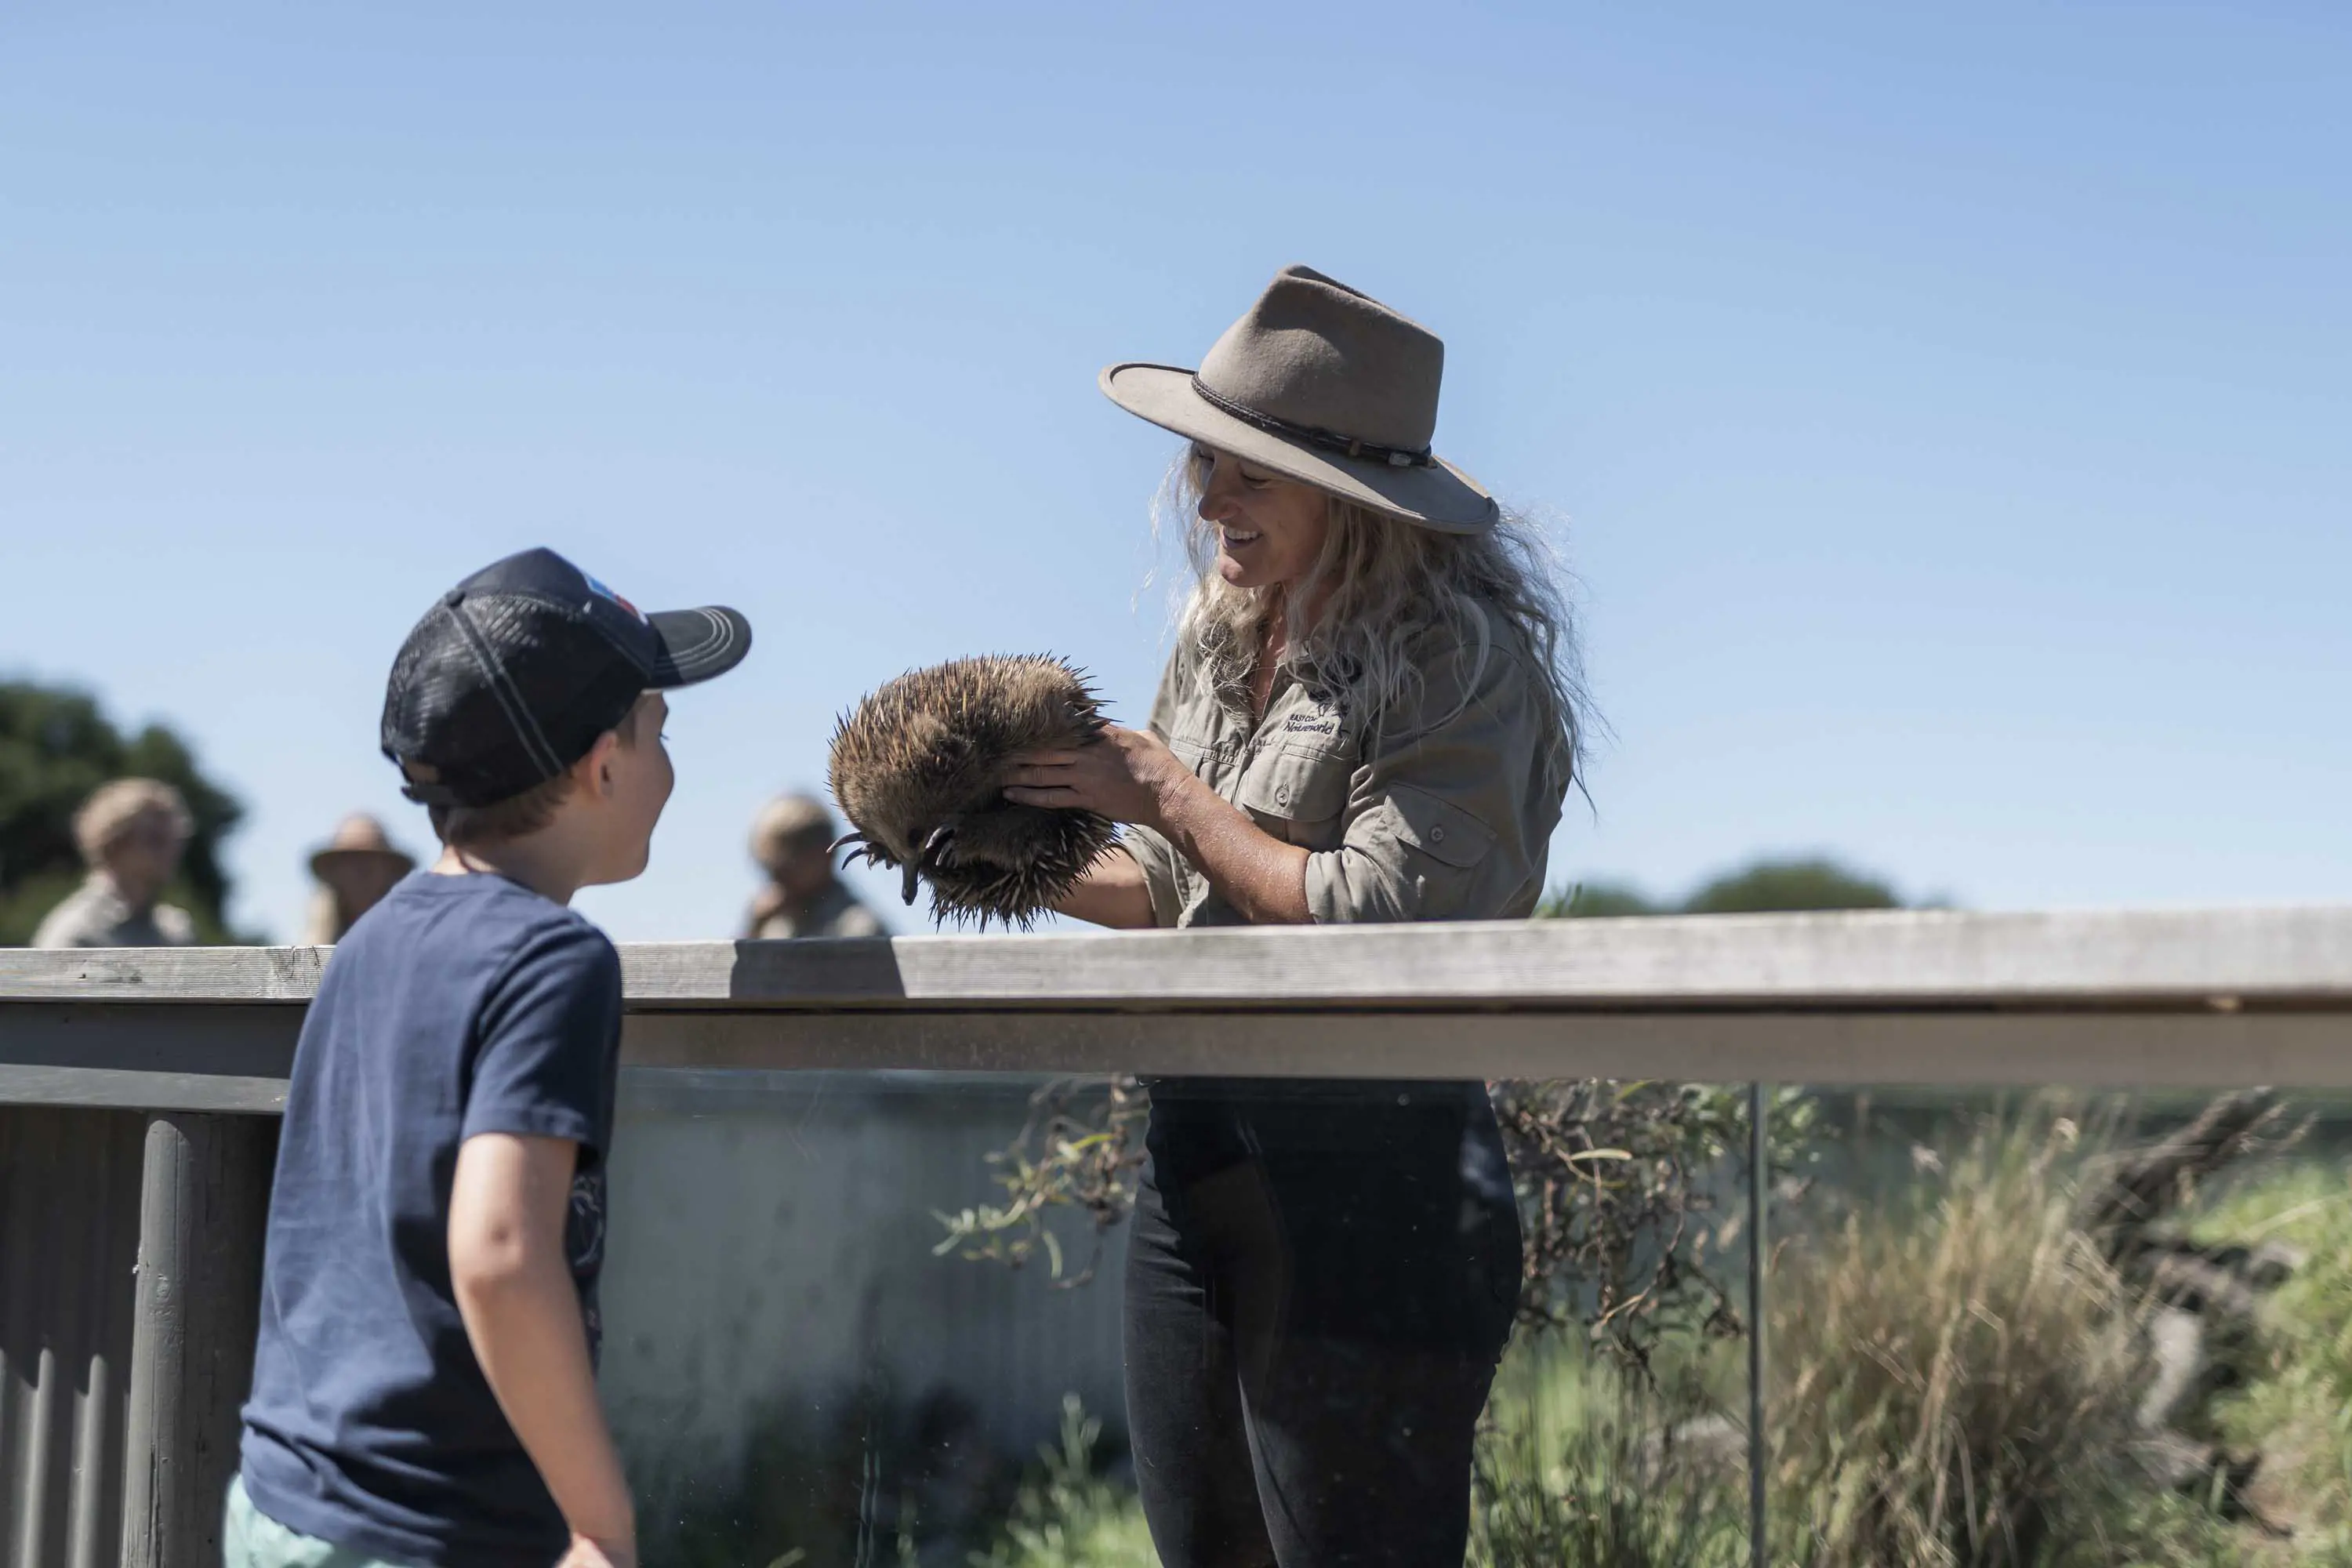 A park guide holds a large echidna over the fence of an enclosure to show a young boy in a baseball cap.